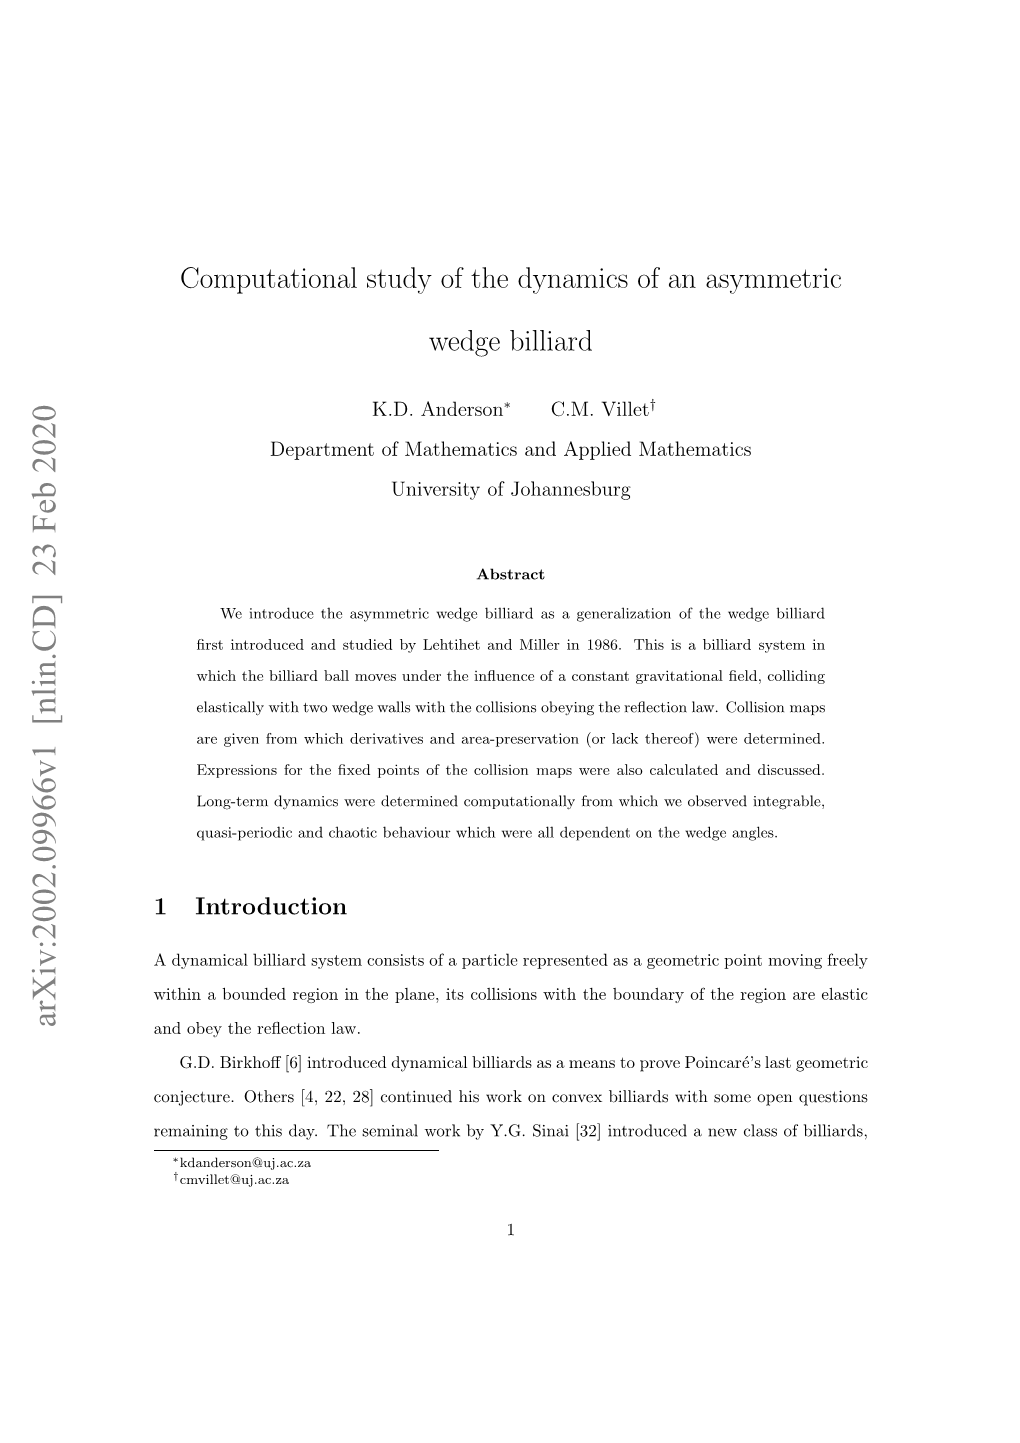 Computational Study of the Dynamics of an Asymmetric Wedge Billiard in a Constant Gravitational ﬁeld